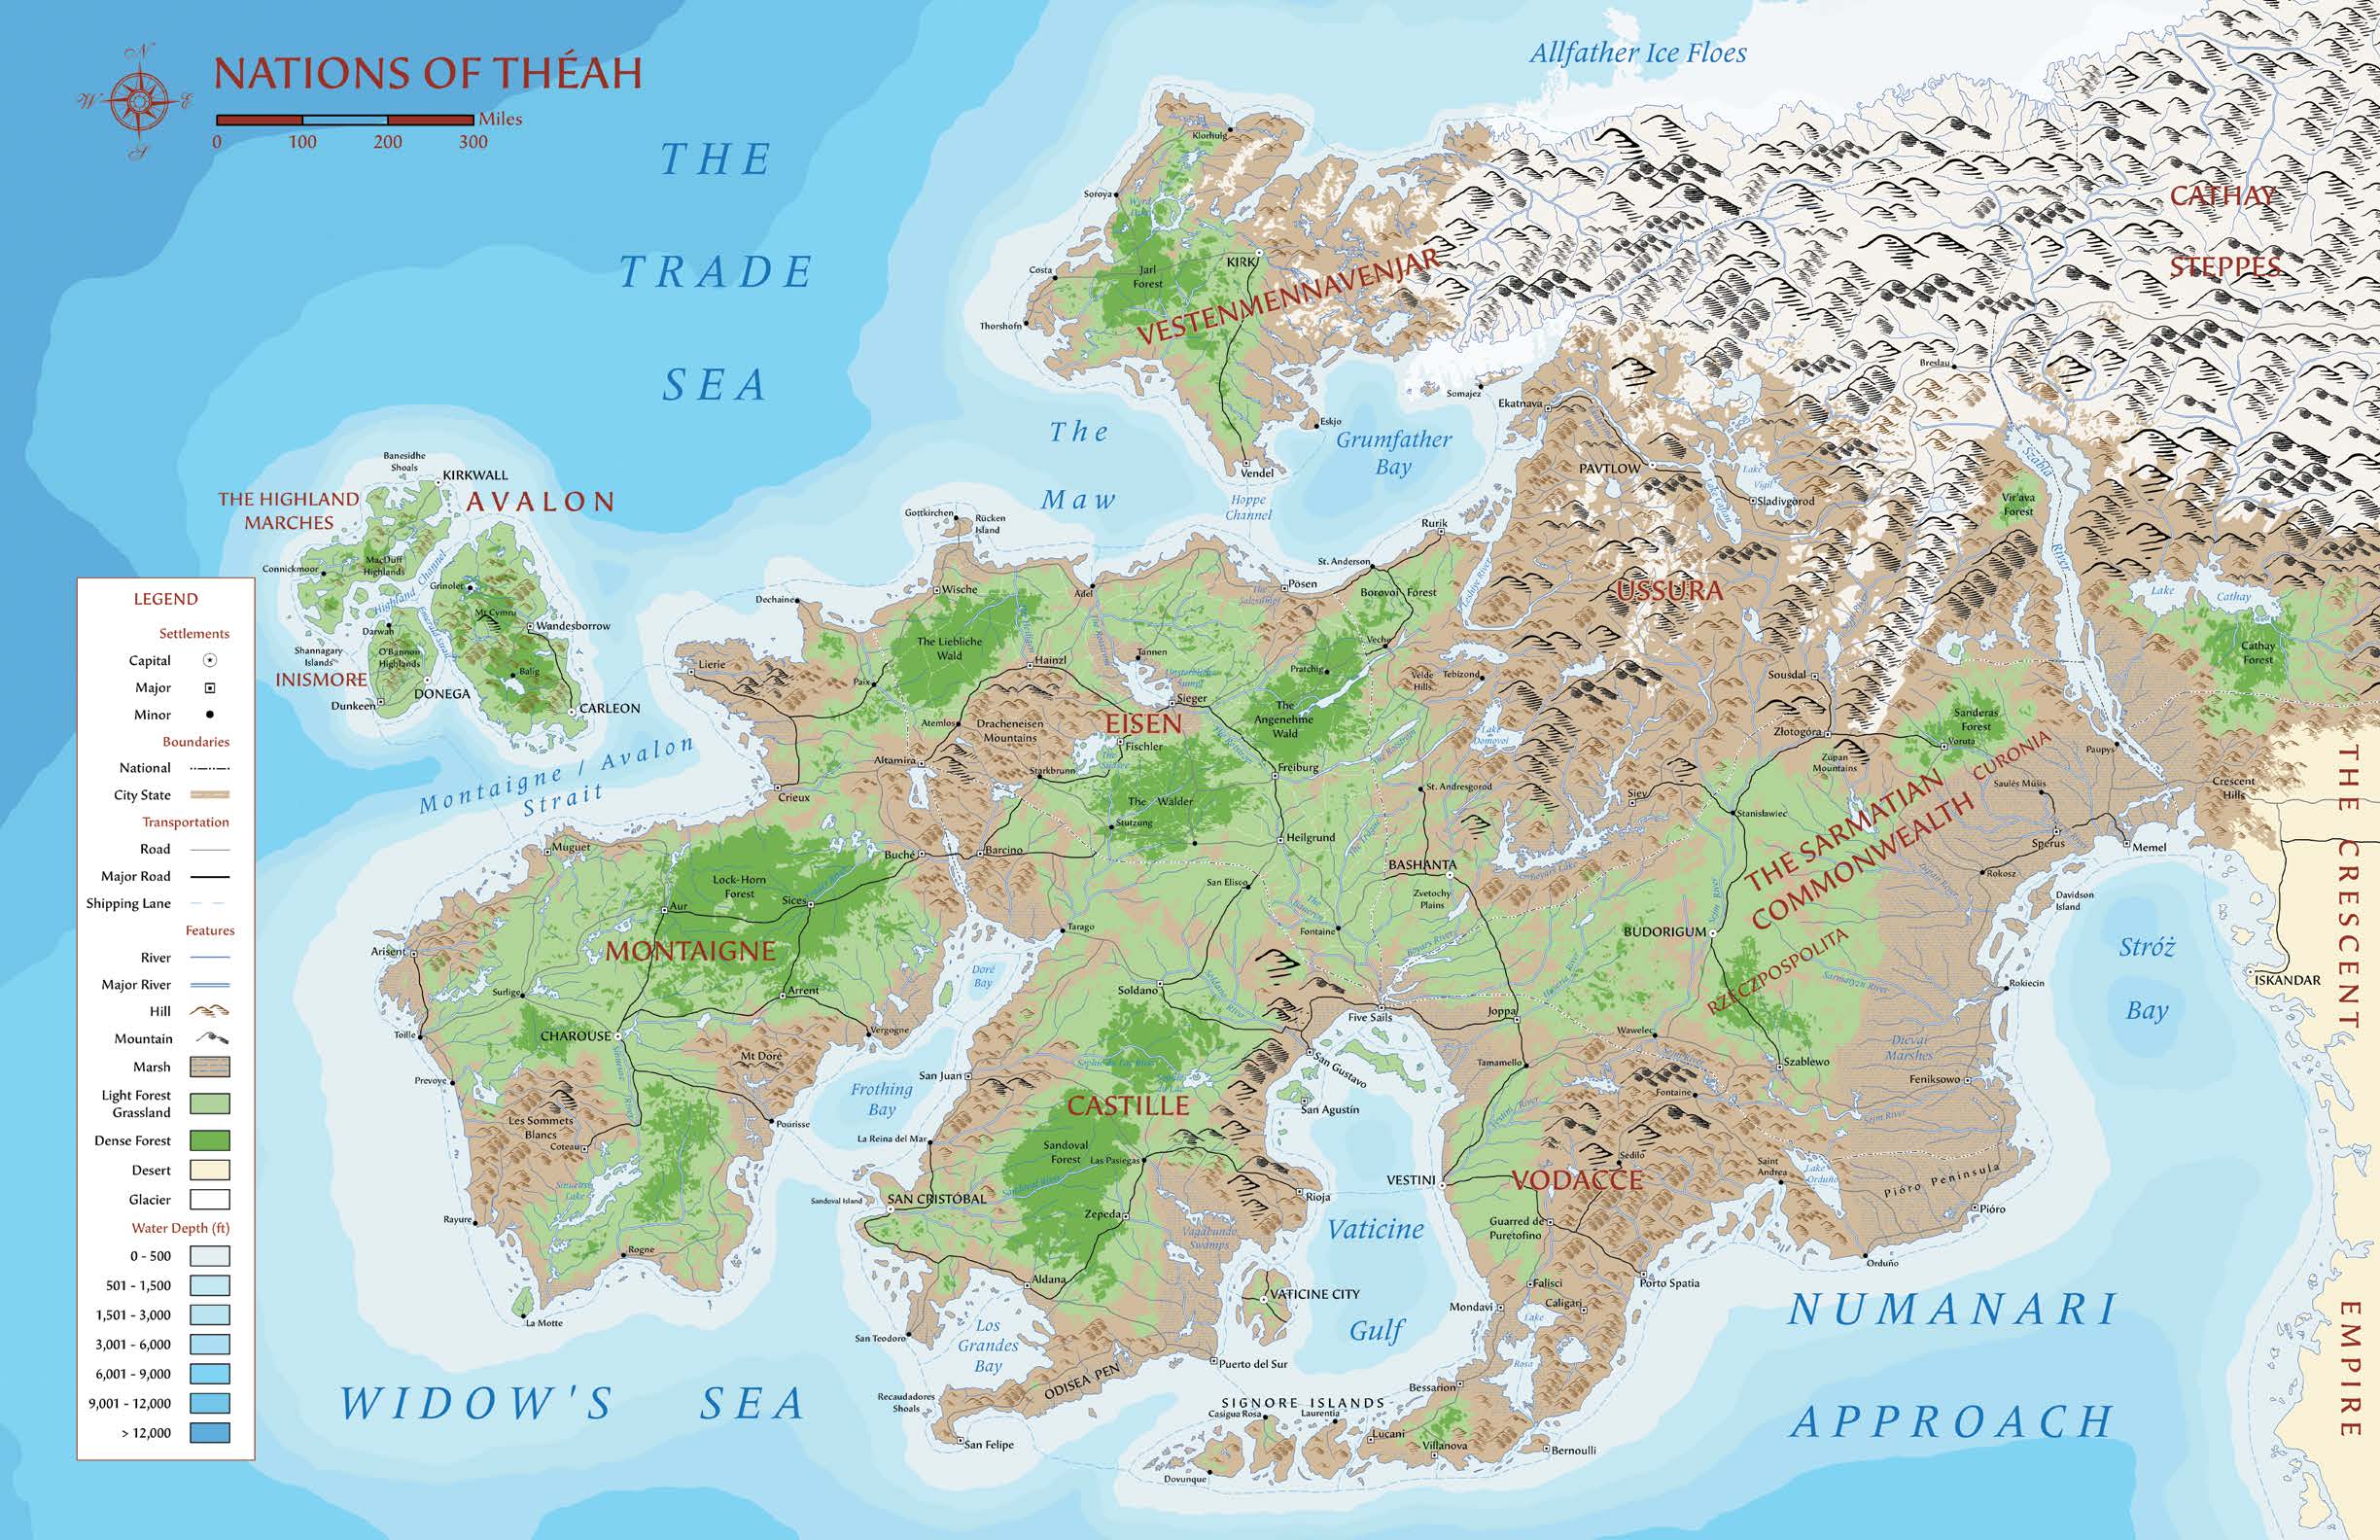 7th Sea Map of Theah full color